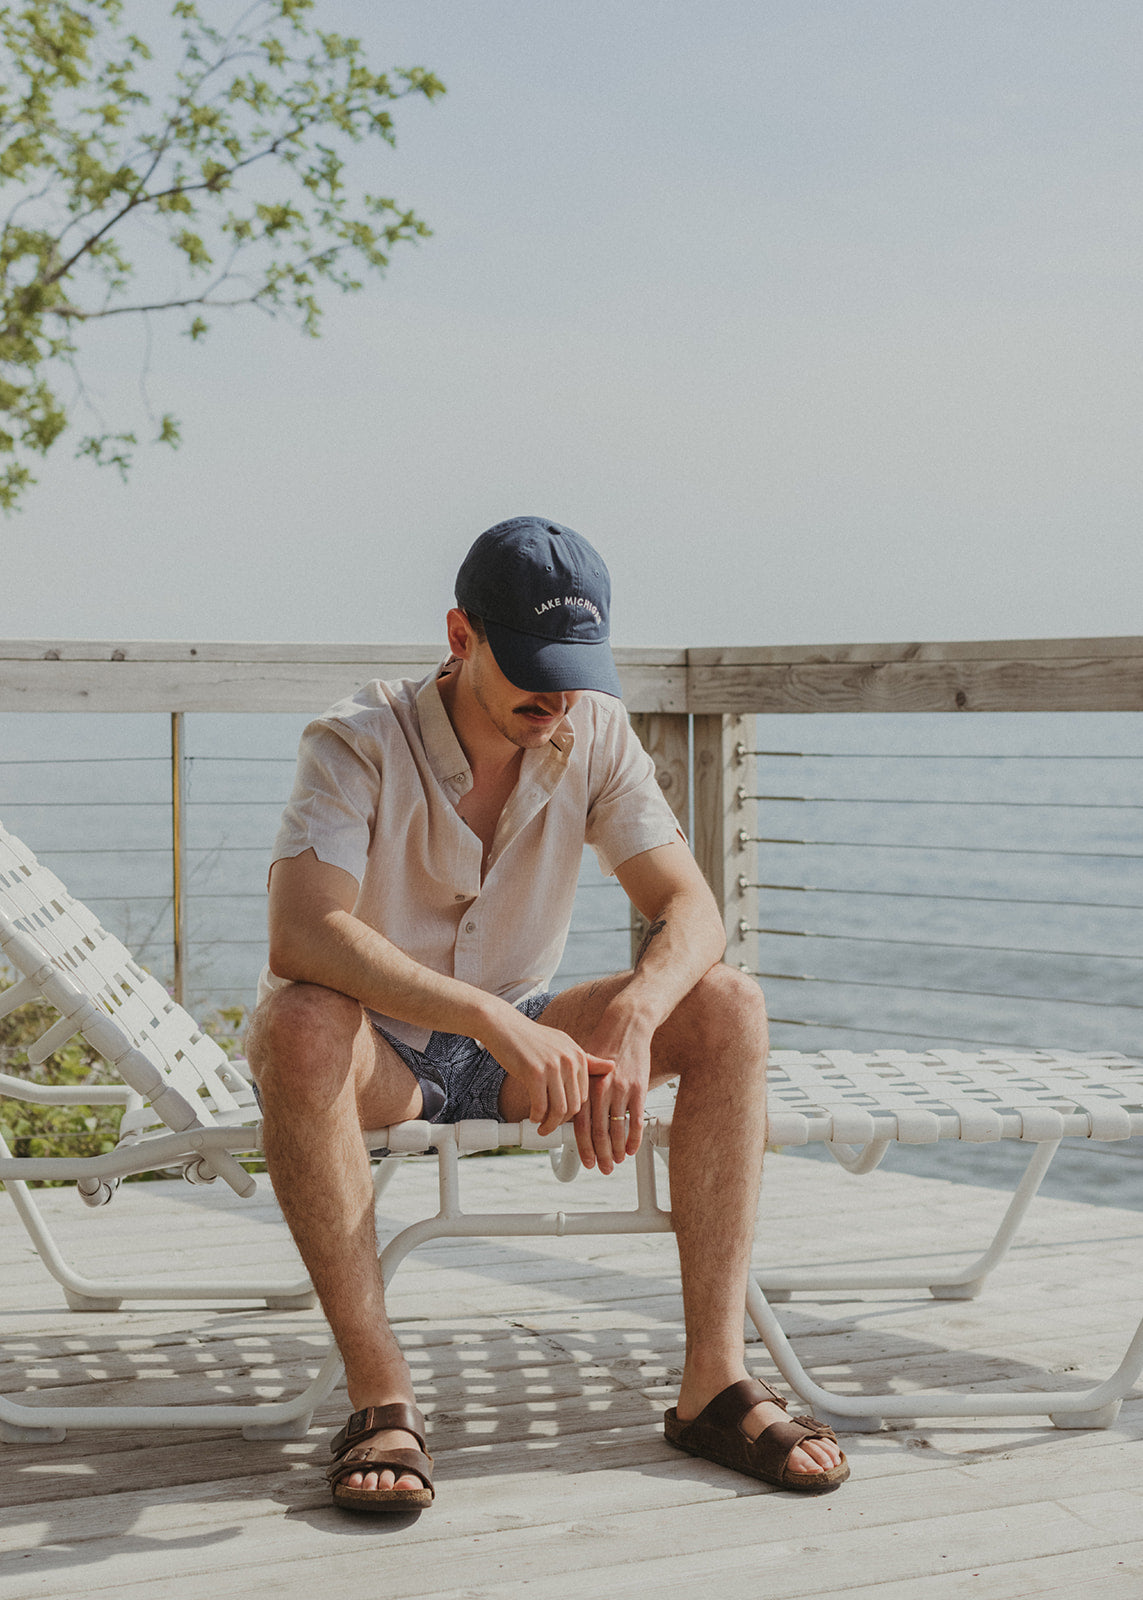 Male model sitting on a beach chair wearing sandals, shorts, a button up shirt and embroidered Lake Michigan dad hat.